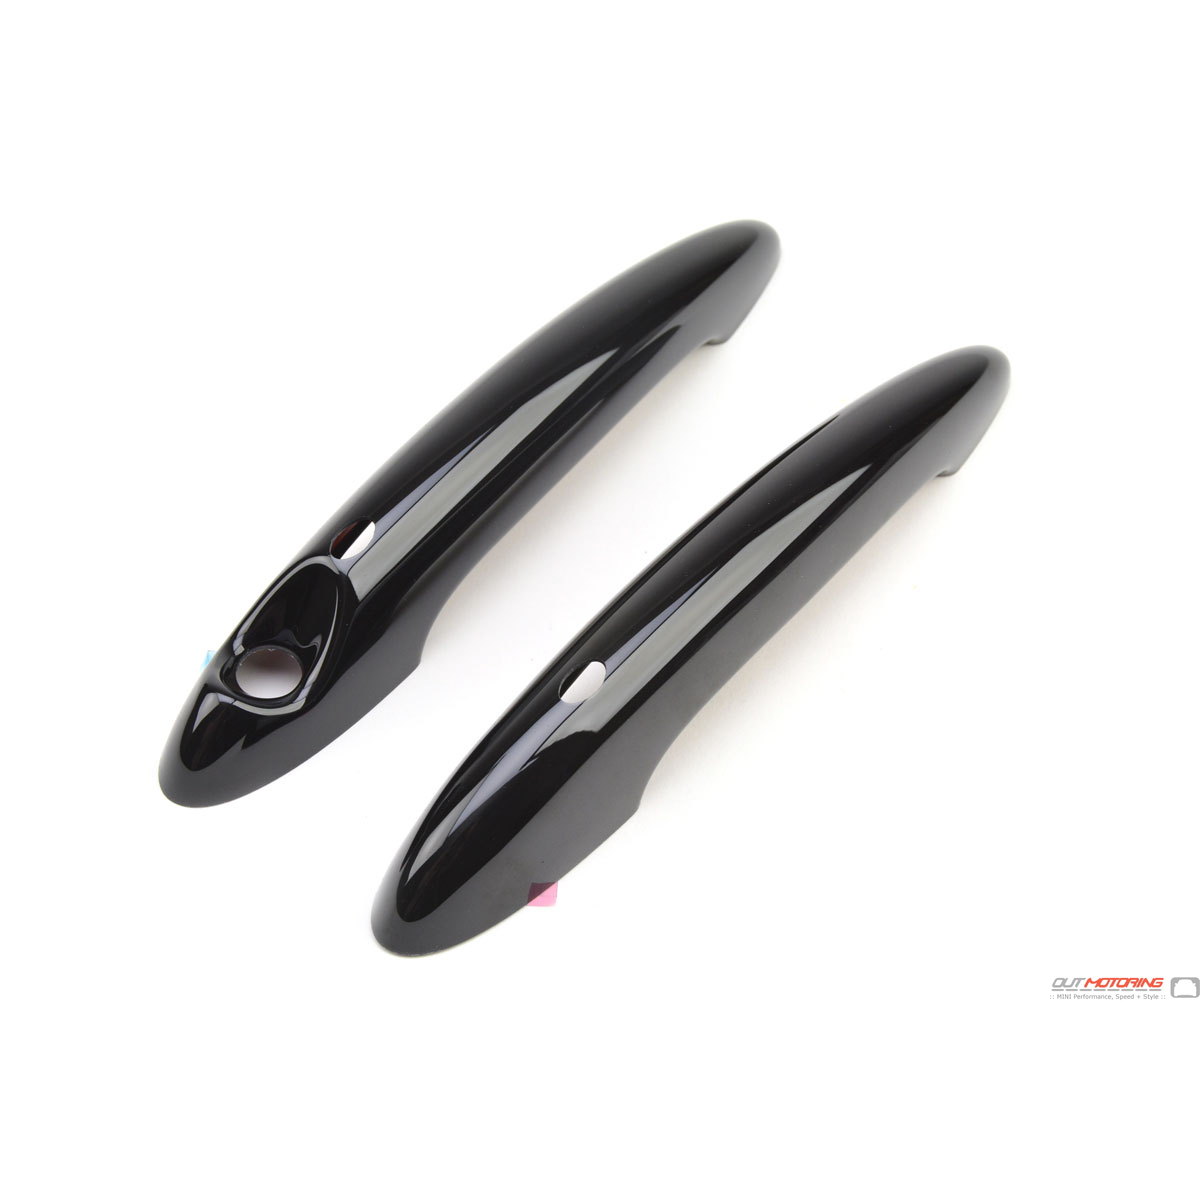 Door Handle Cover GLOSS BLK 2x for MINI Cooper S R50 R52 R53 R55 56 57 58 59 R61